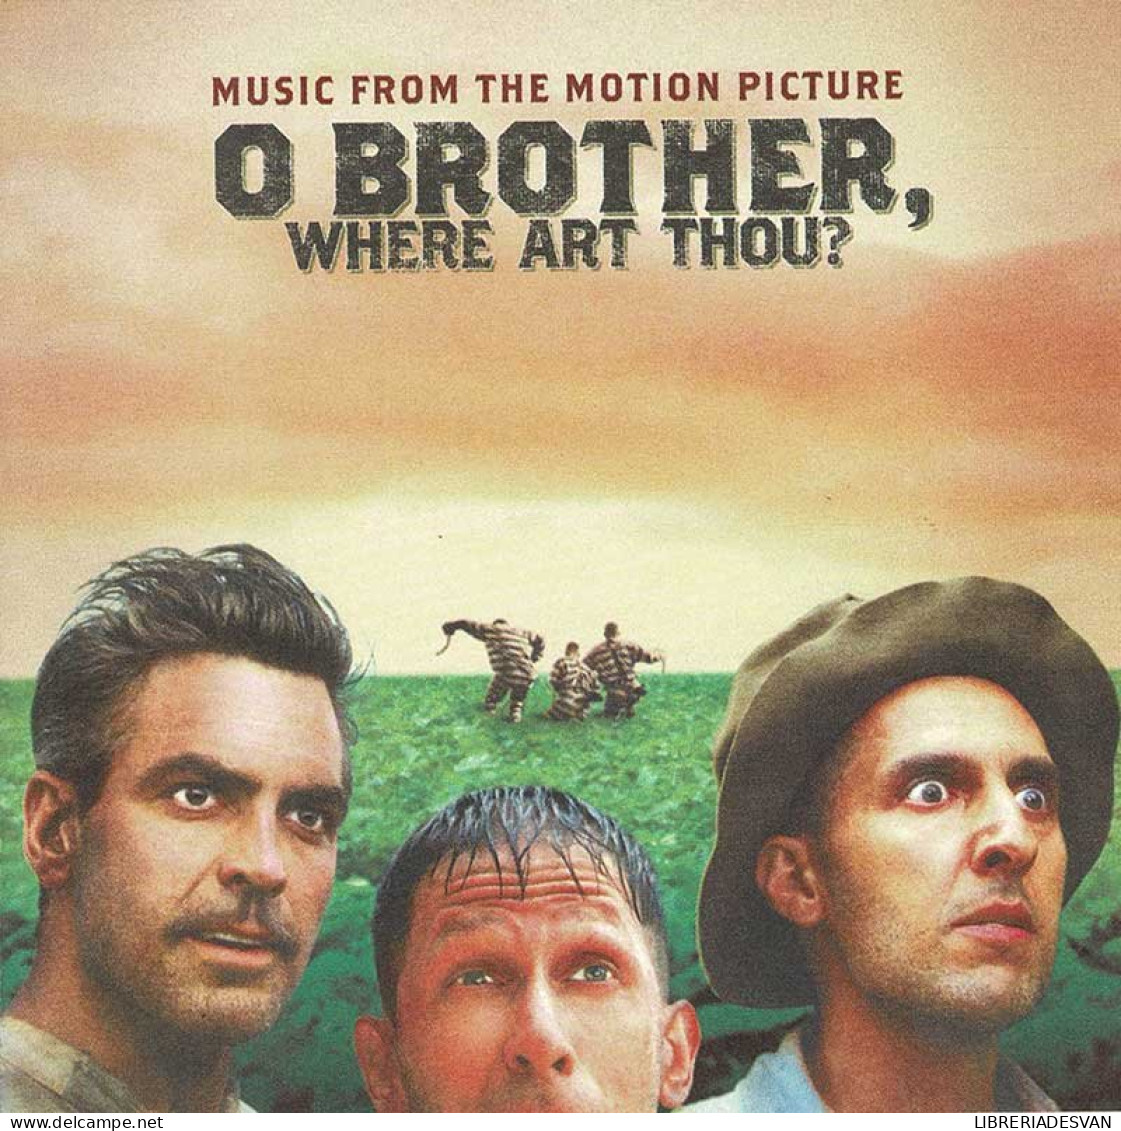 O Brother, Where Art Thou? (Music From The Motion Picture). CD - Soundtracks, Film Music